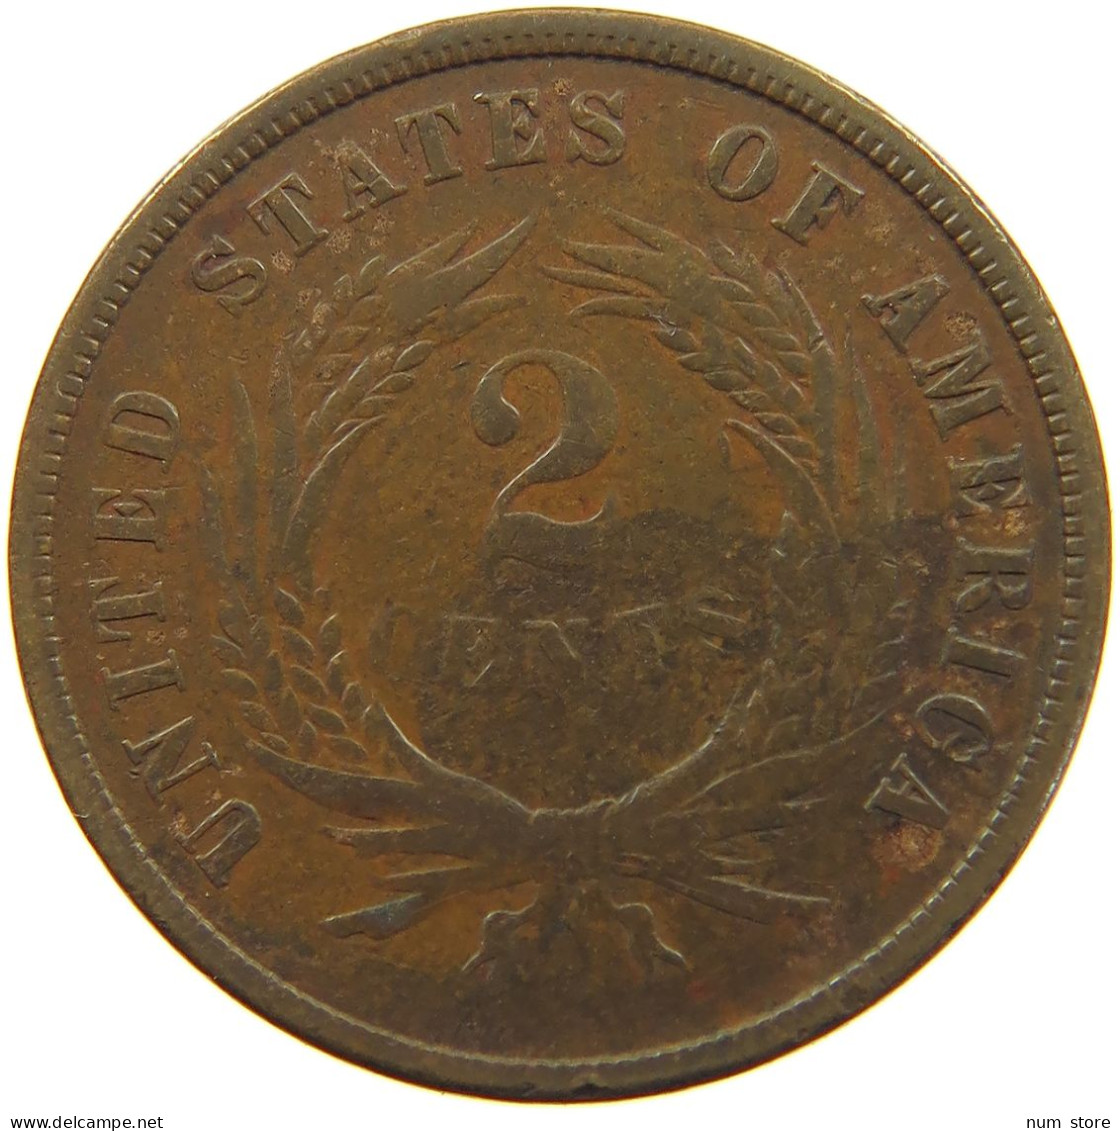 UNITED STATES OF AMERICA 2 CENTS 1865  #t008 0061 - 2, 3 & 20 Cents